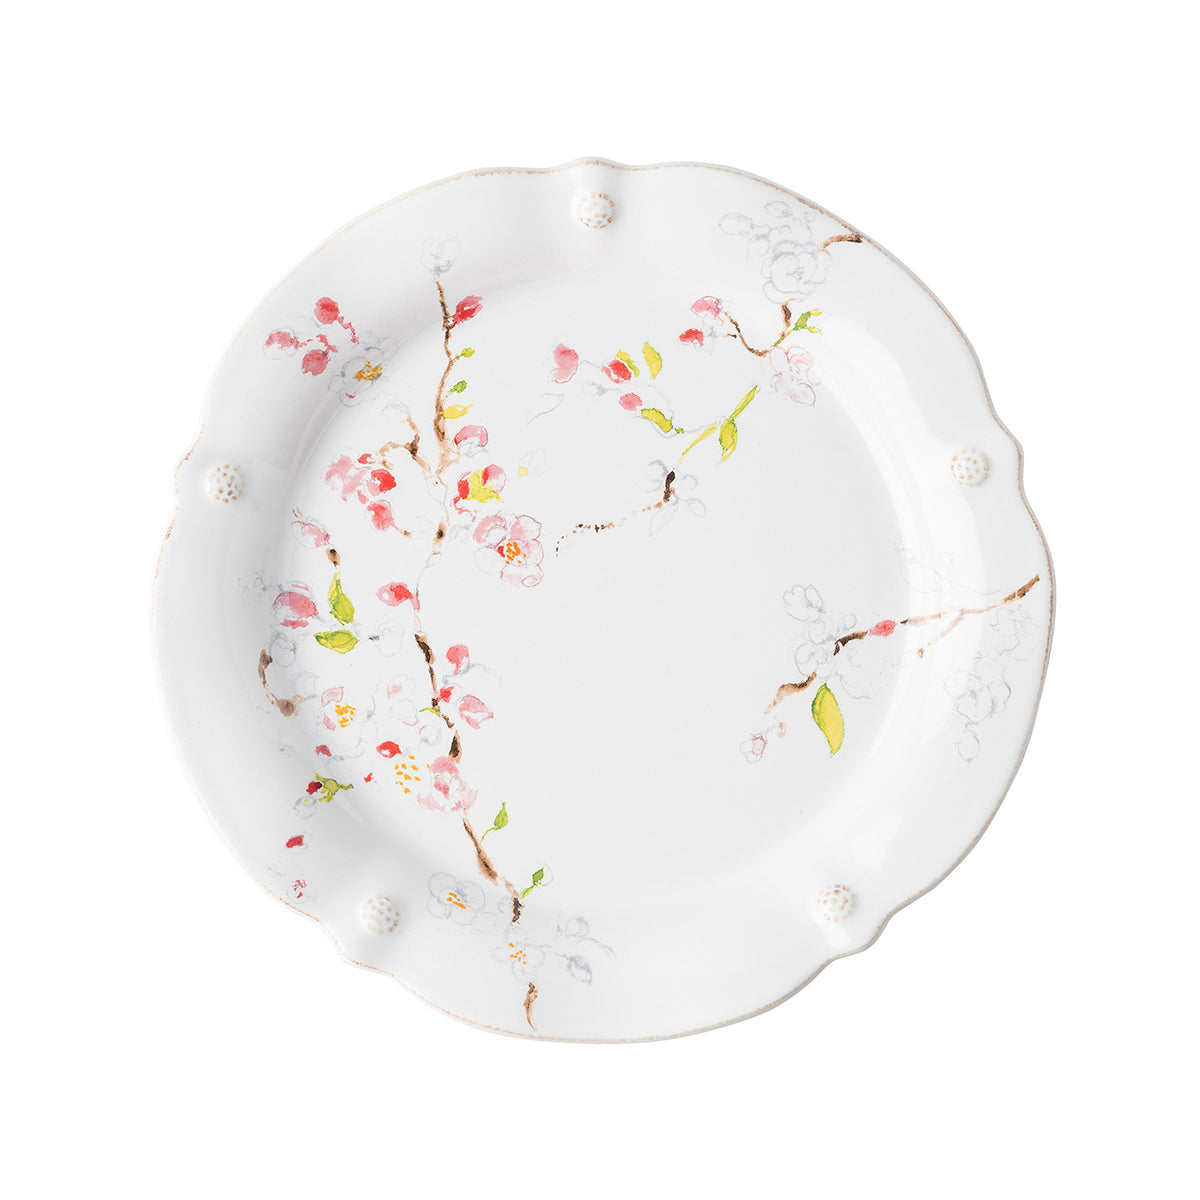 Berry & Thread Floral Sketch Dinner Plate Set/4 - Cherry Blossom | 2nd